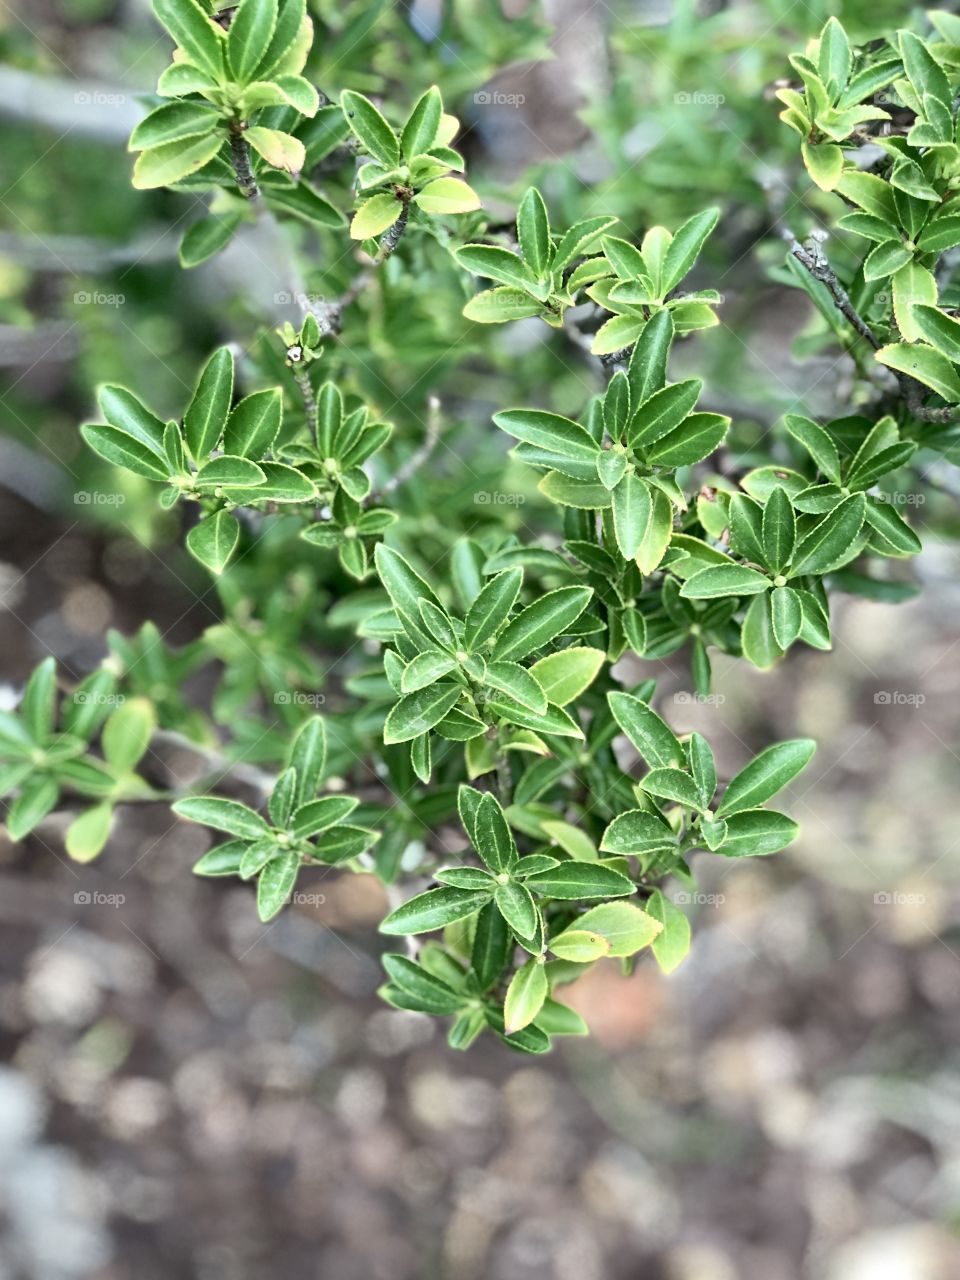 Shrub growing in my front yard 